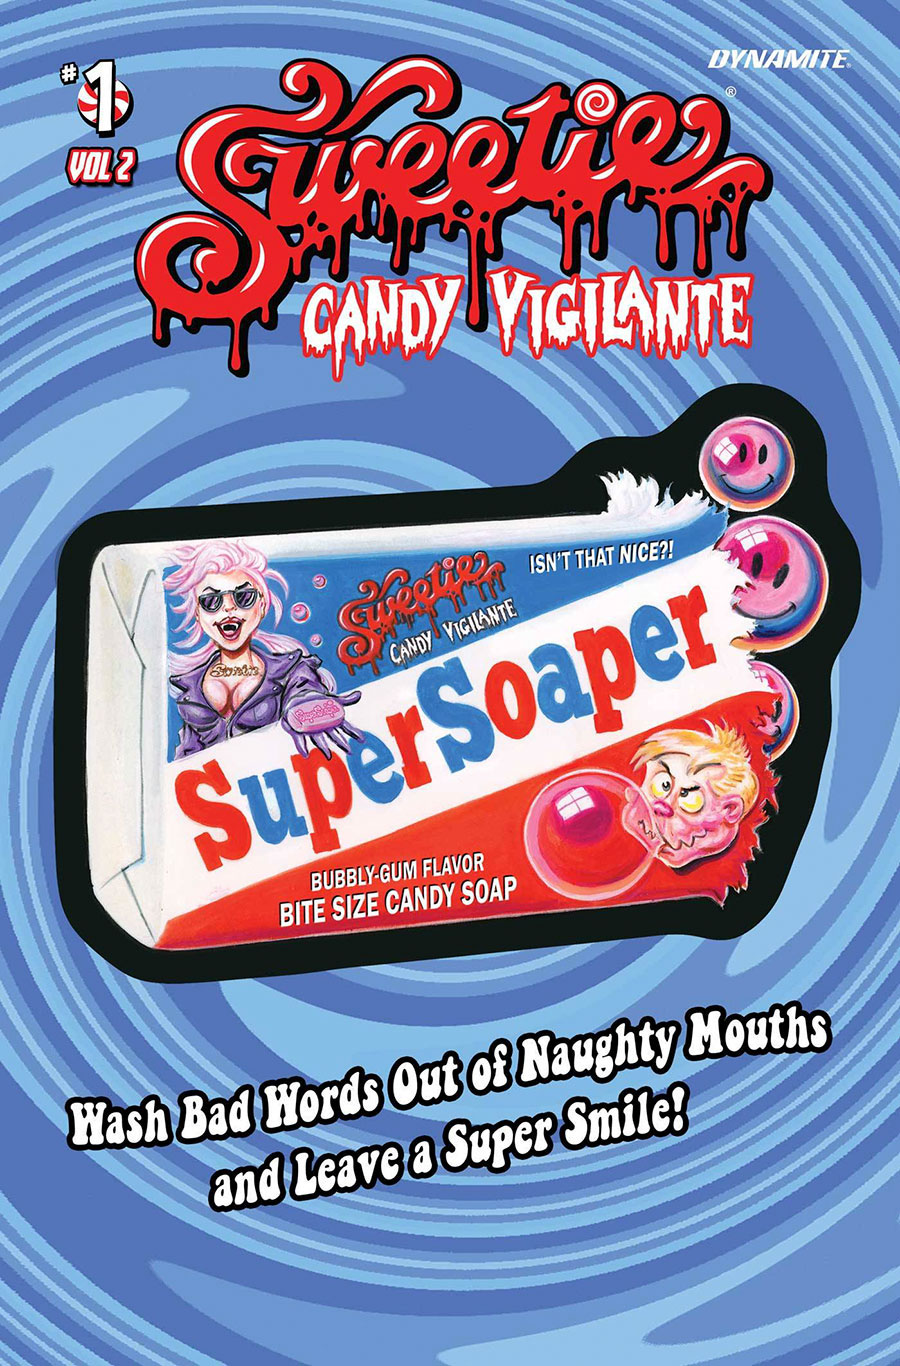 Sweetie Candy Vigilante Vol 2 #1 Cover L Variant Neil Camera Supersoape Cover